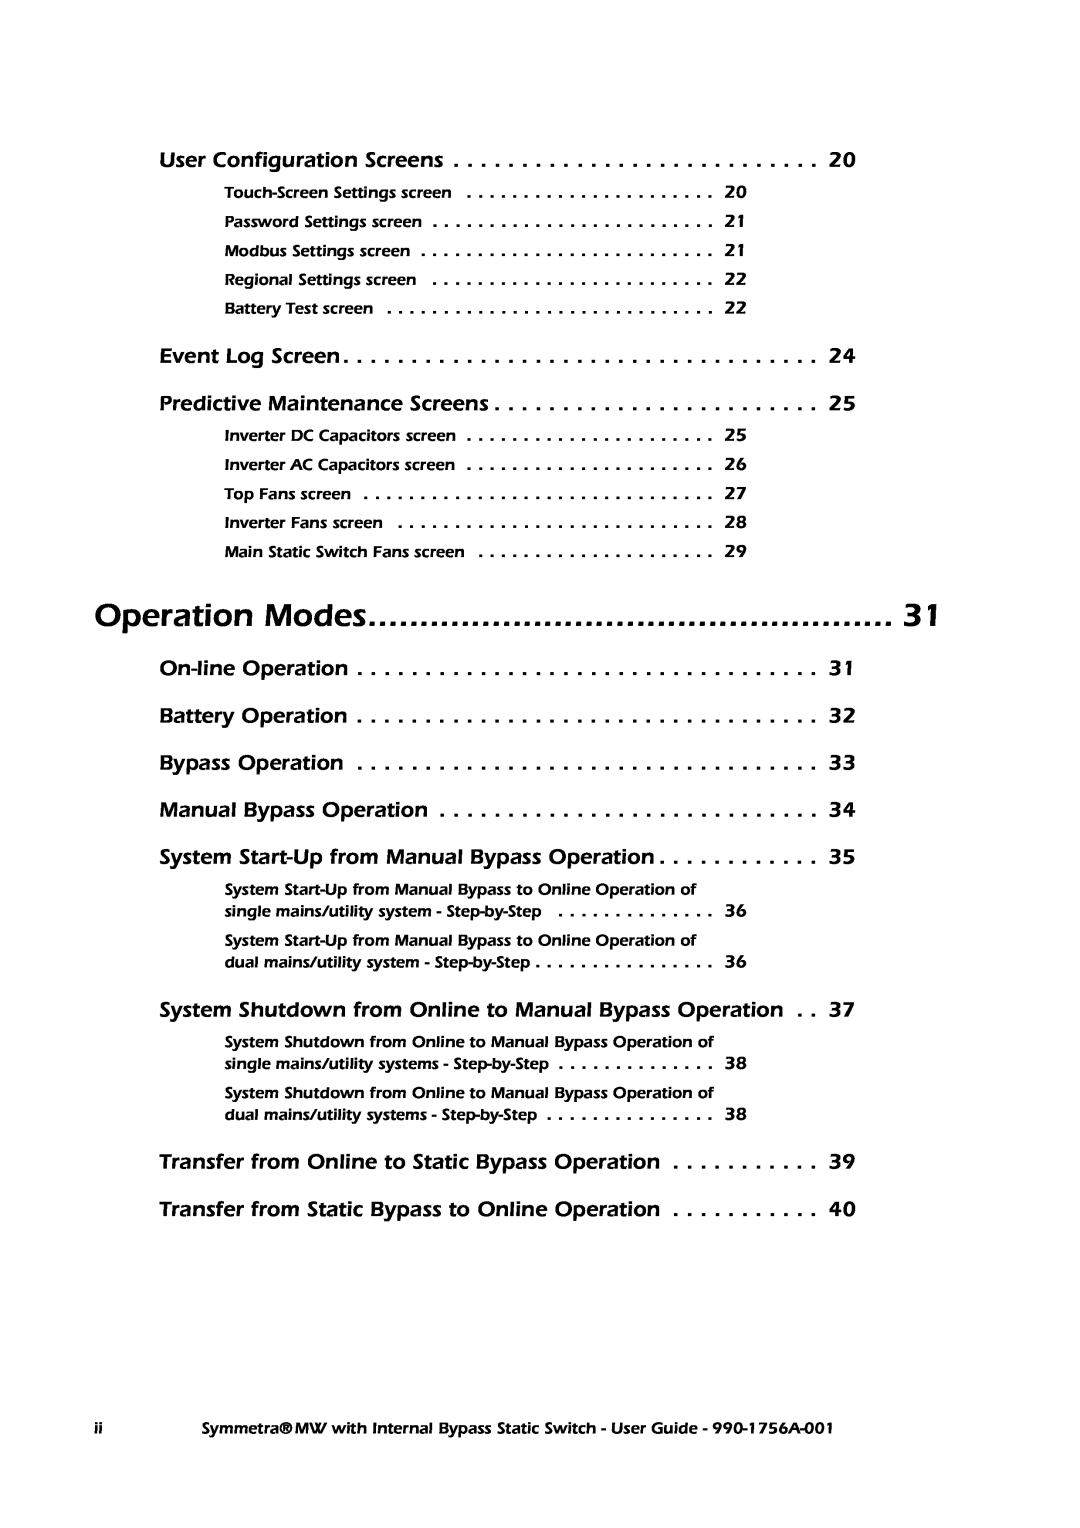 American Power Conversion Bypass Static manual Operation Modes 